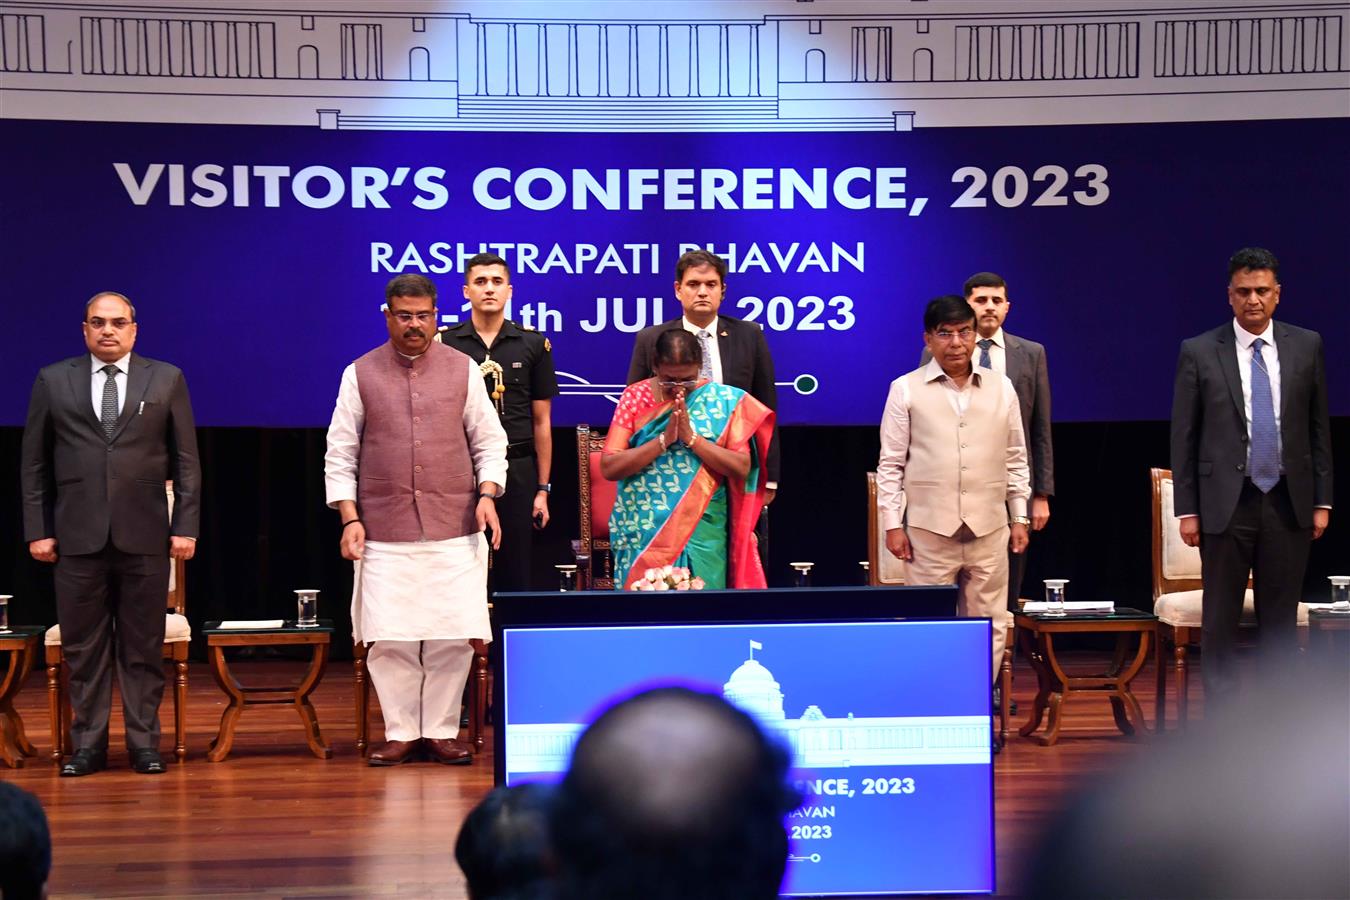 The two-day Visitor's Conference at Rashtrapati Bhavan concluded on July 11, 2023.